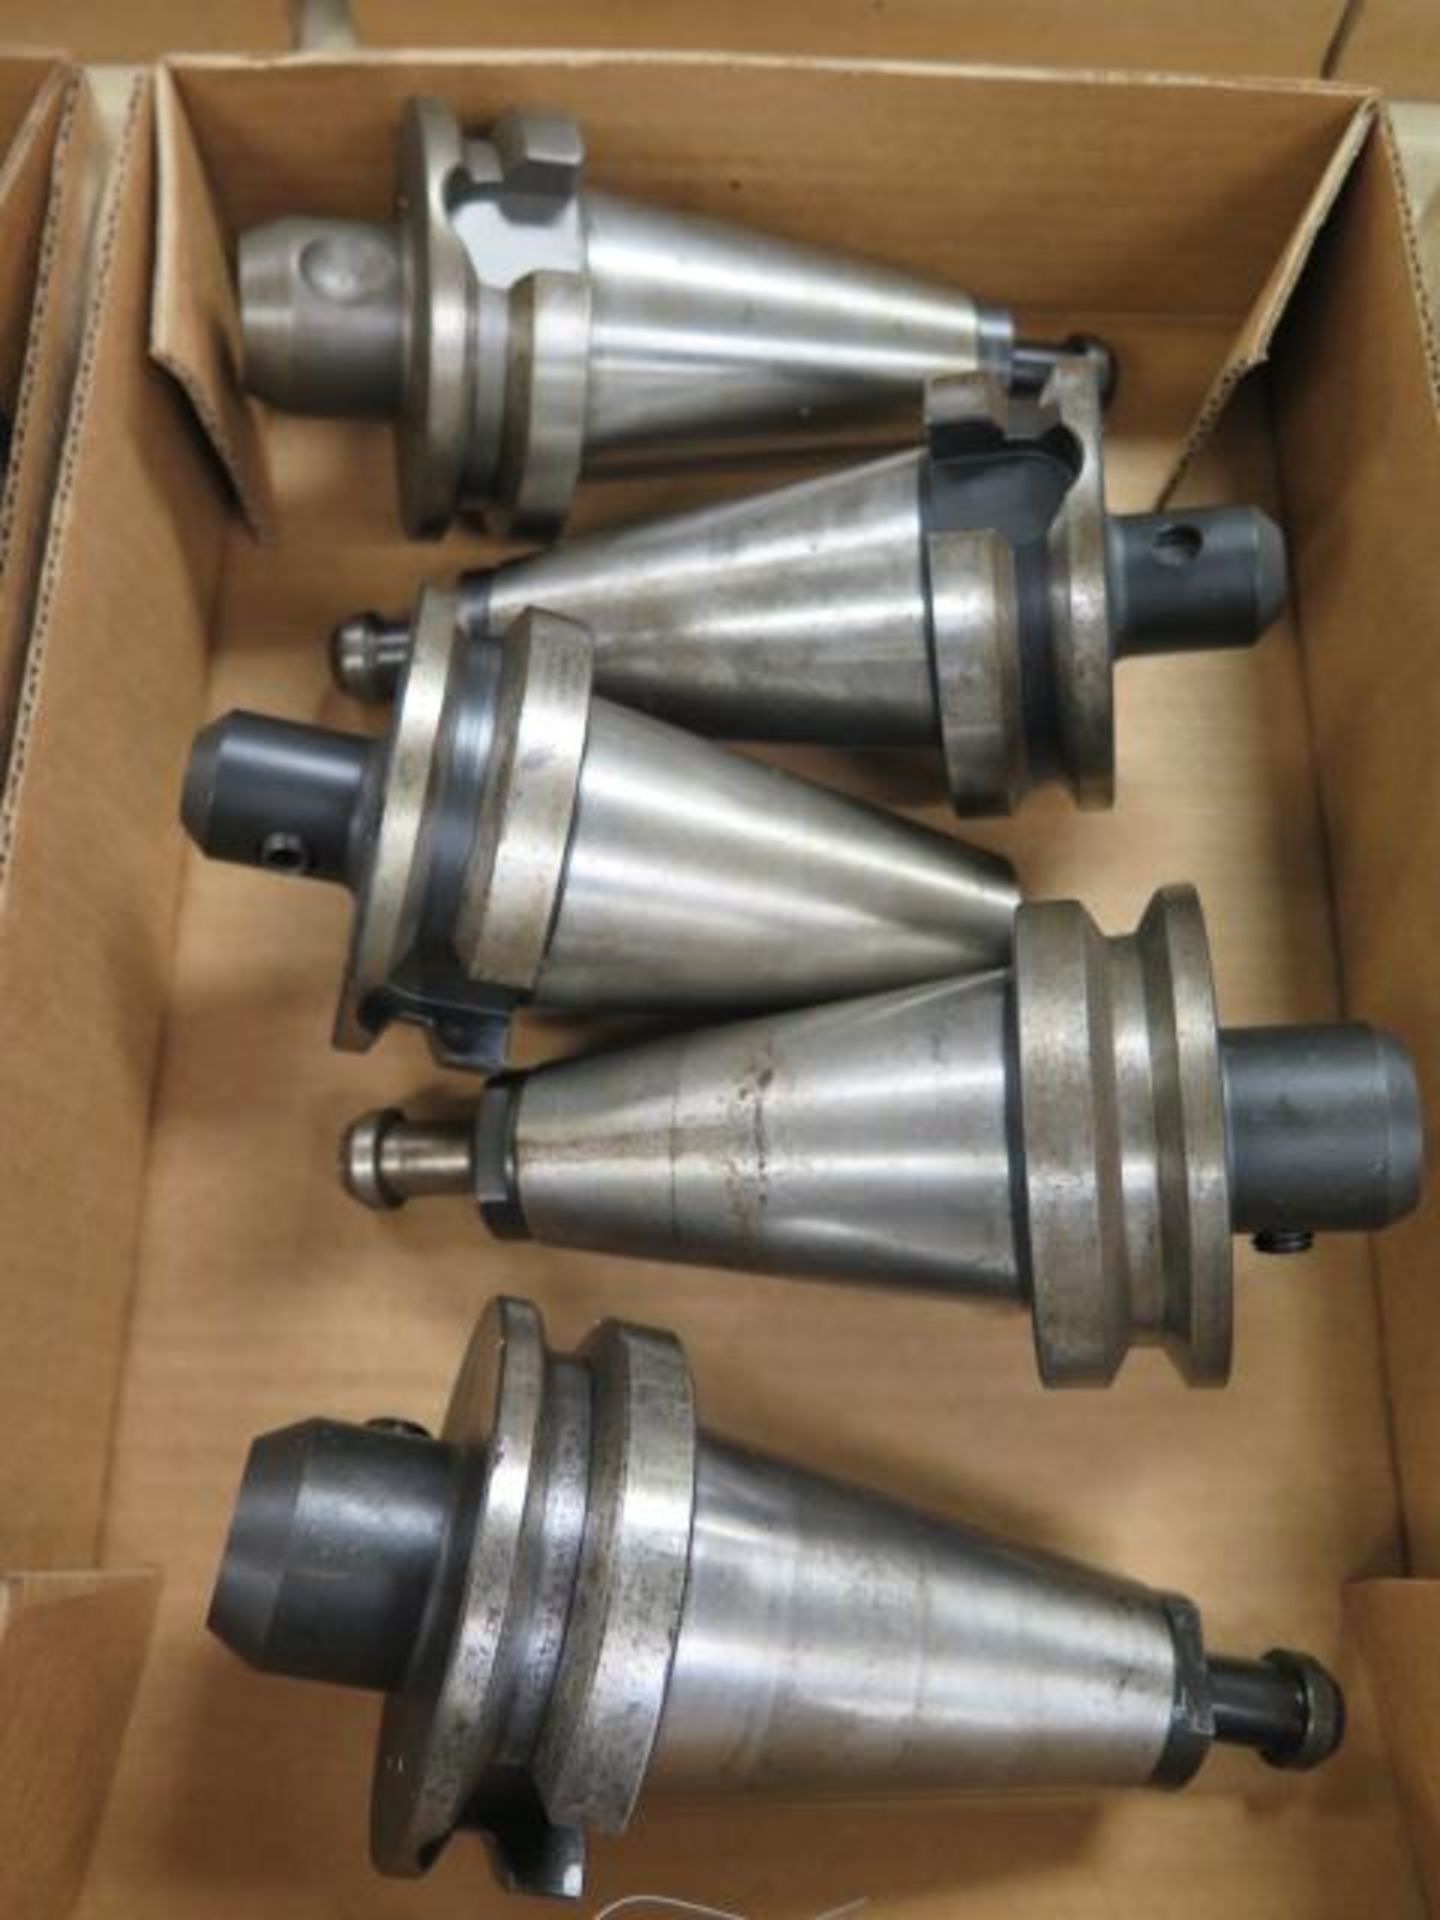 BT-50 Taper Tooling (5) (SOLD AS-IS - NO WARRANTY) (Located @ 2229 Ringwood Ave. San Jose) - Image 2 of 5